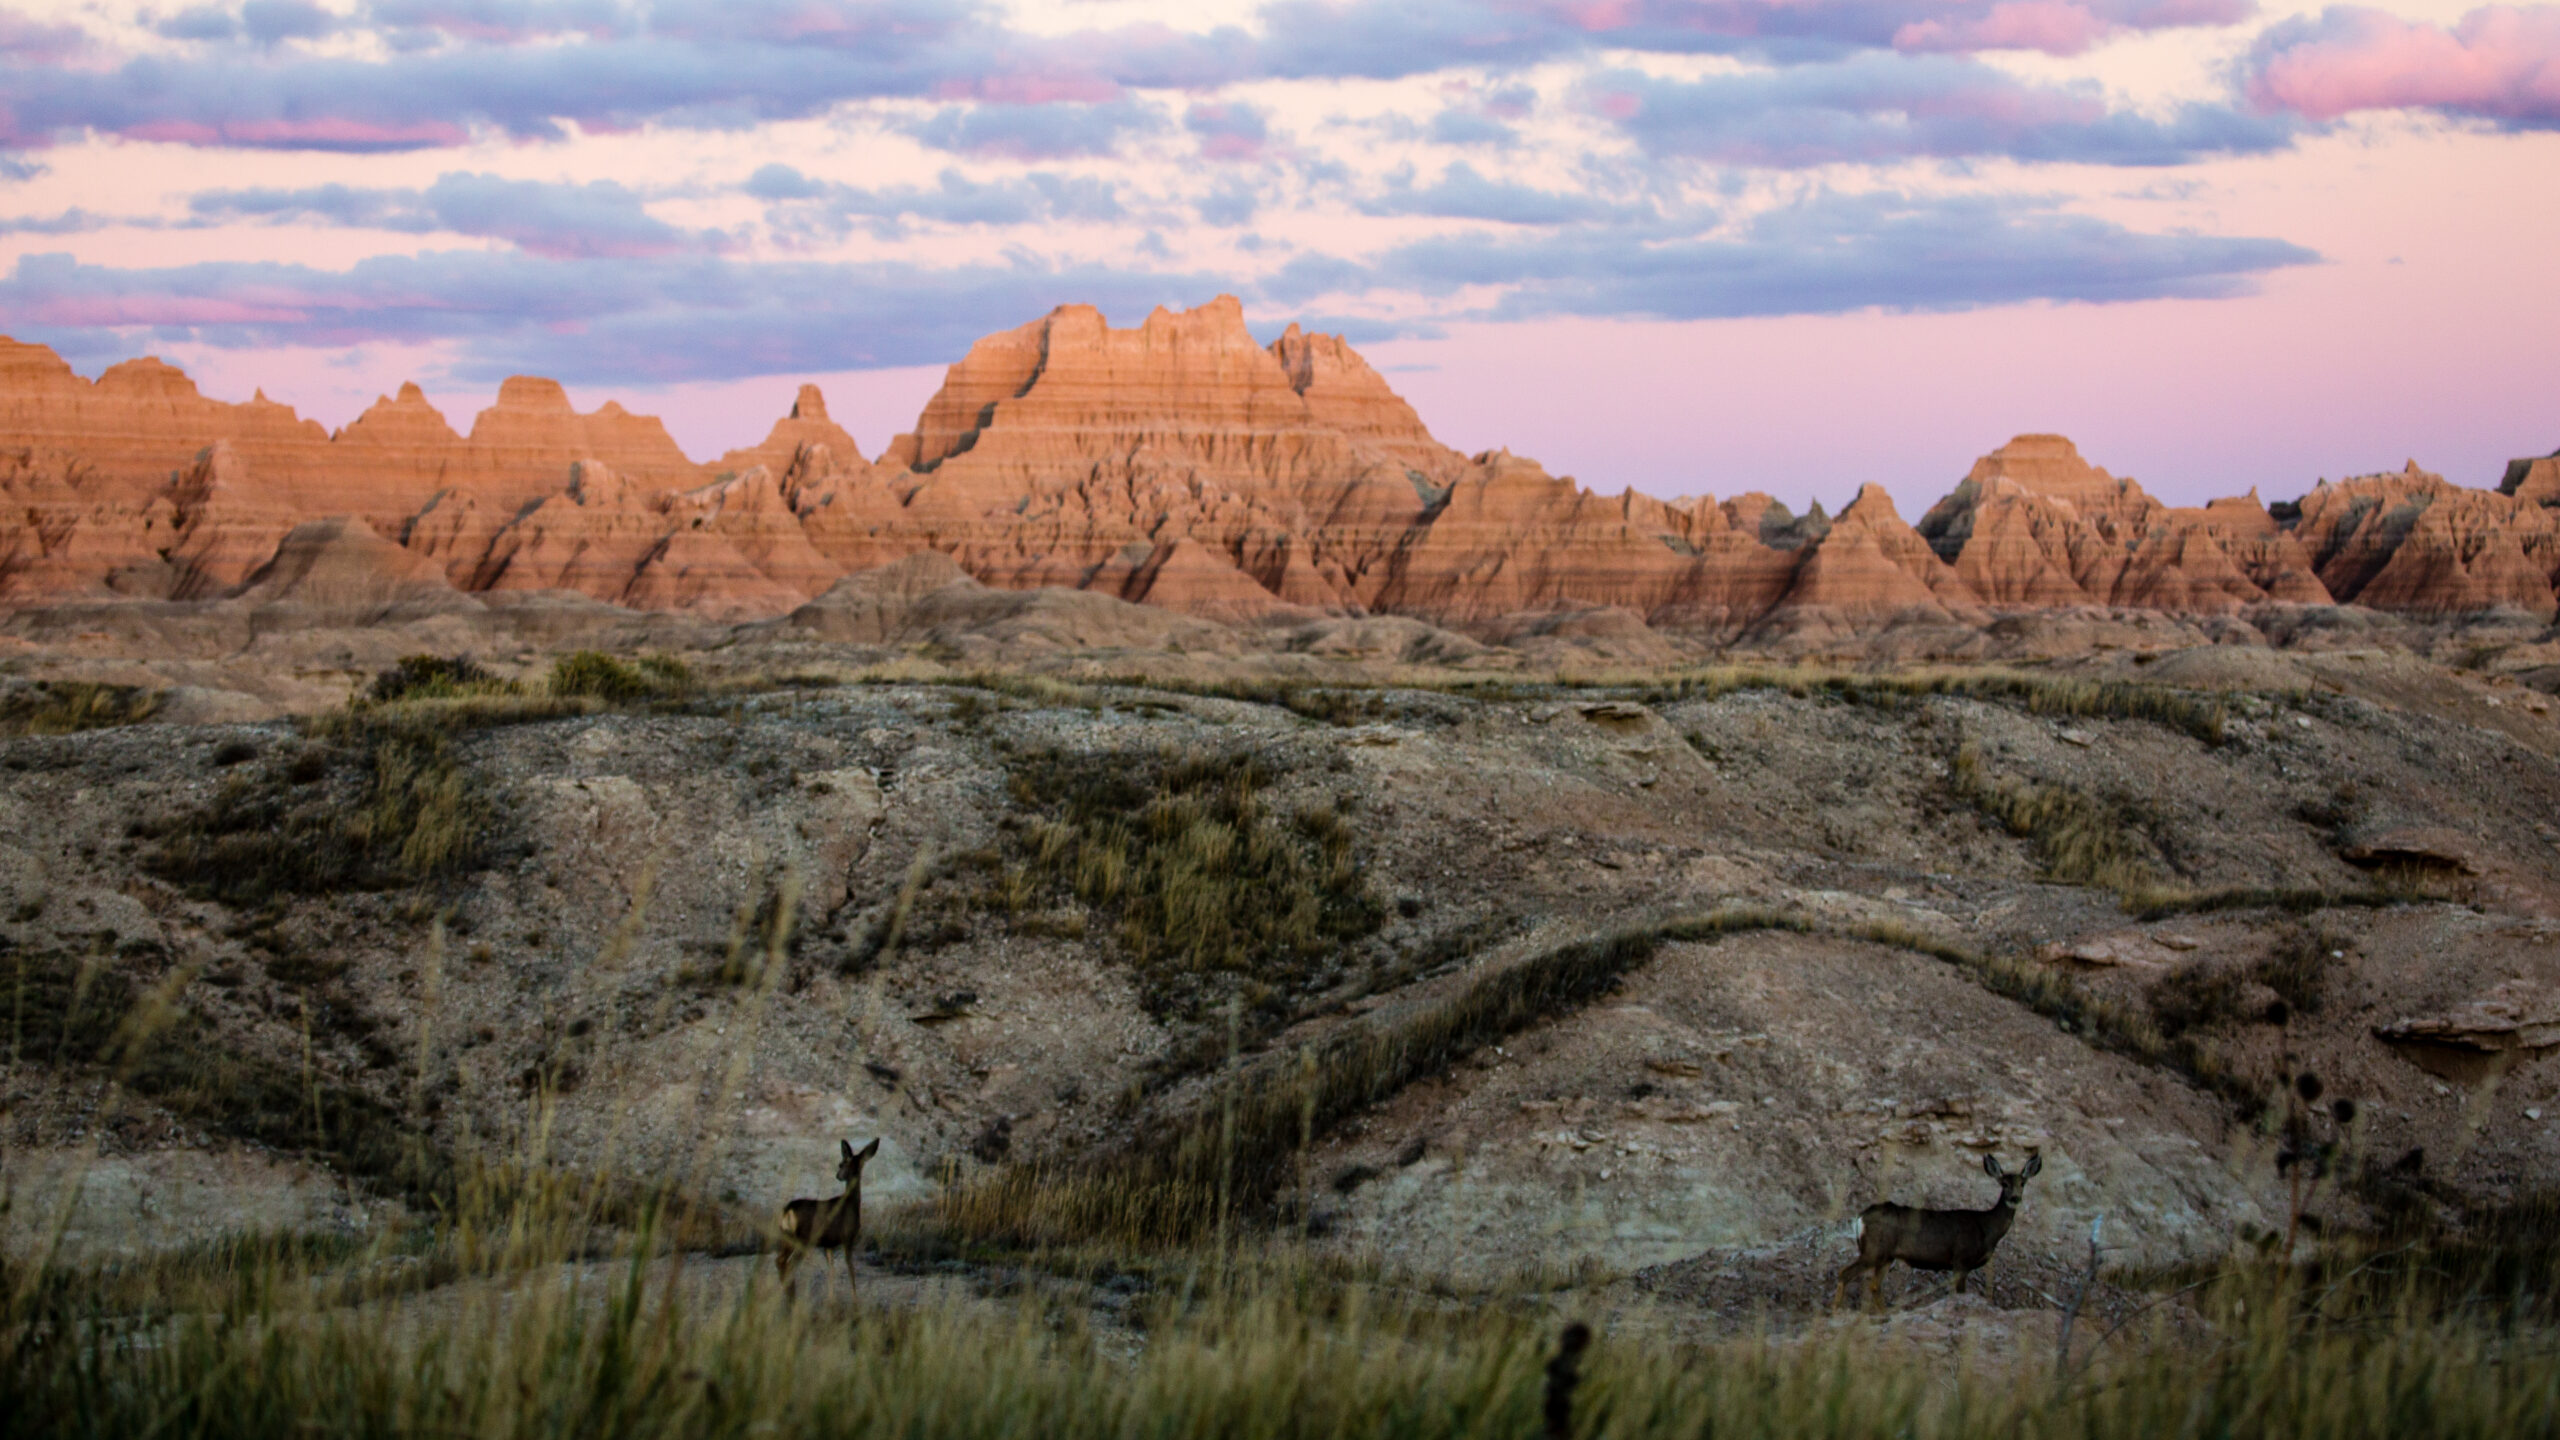 South Dakota's Badlands National Park offers a surreal landscape dotted with unusual rock formations